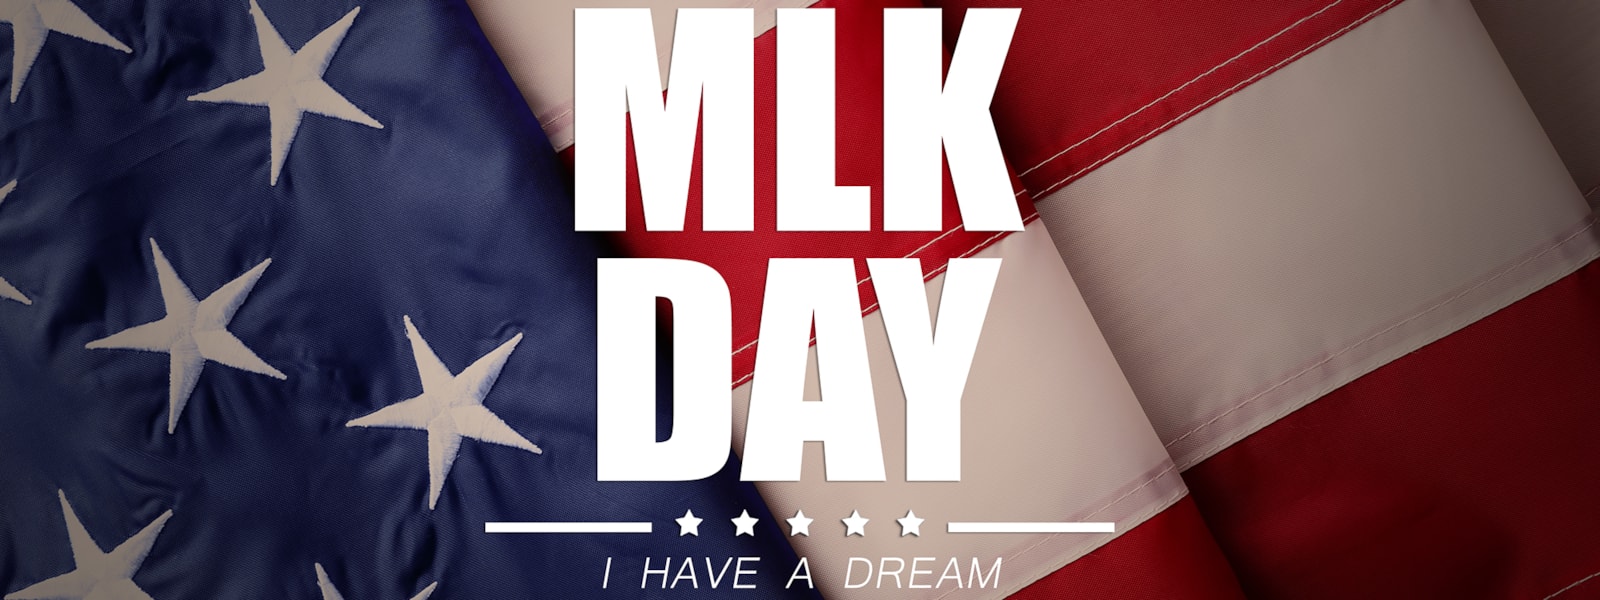 Flag with MLK DAY written over it